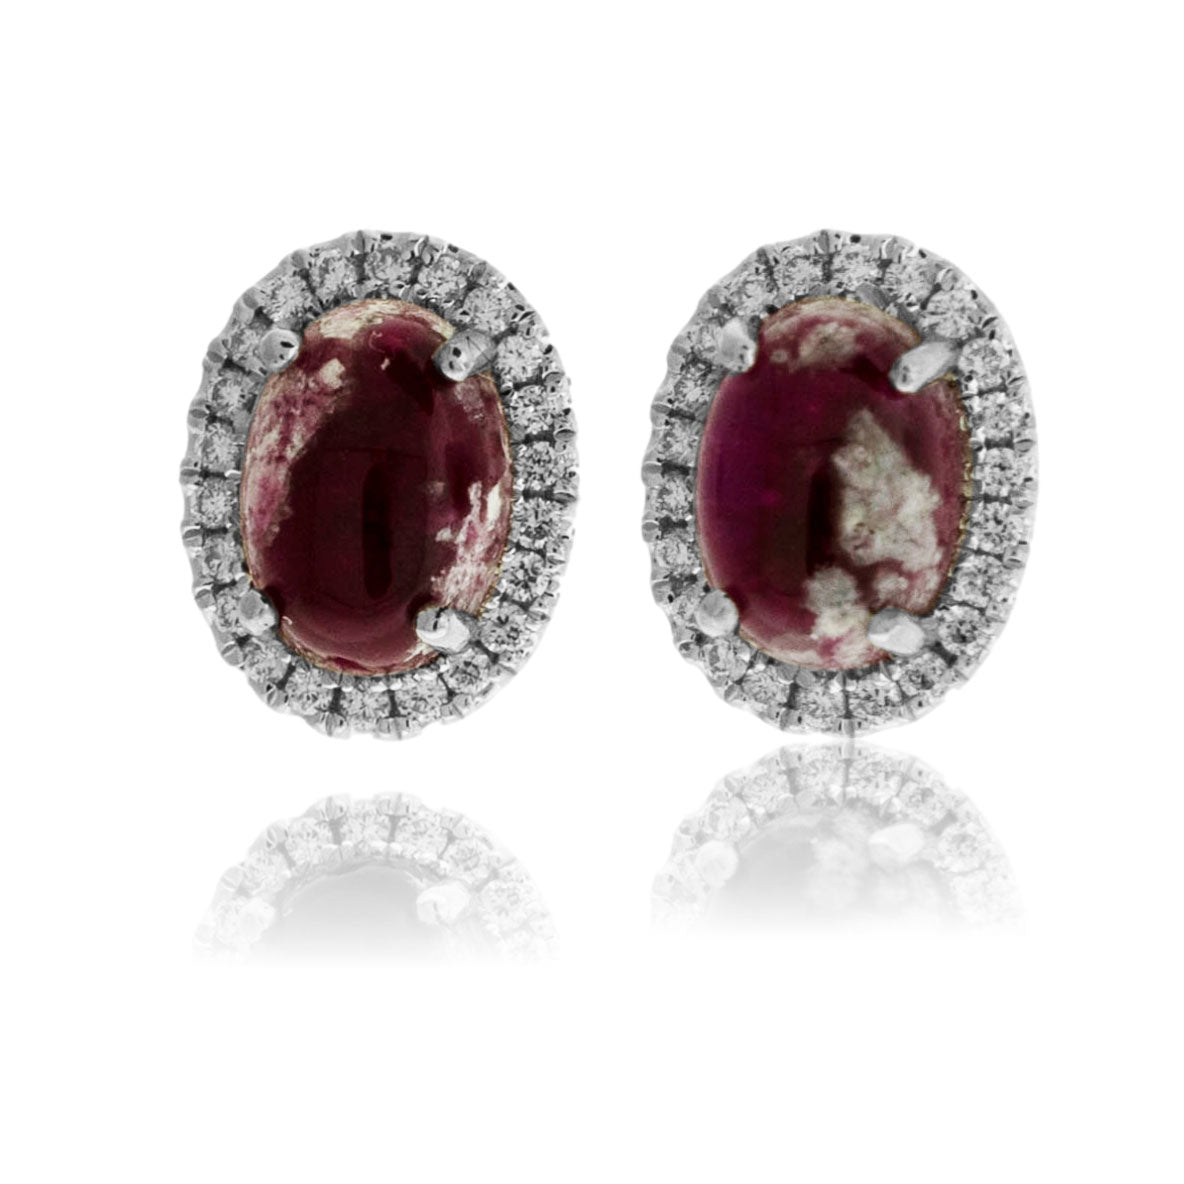 European 1980s cabochon ruby and diamond earrings at 1stDibs